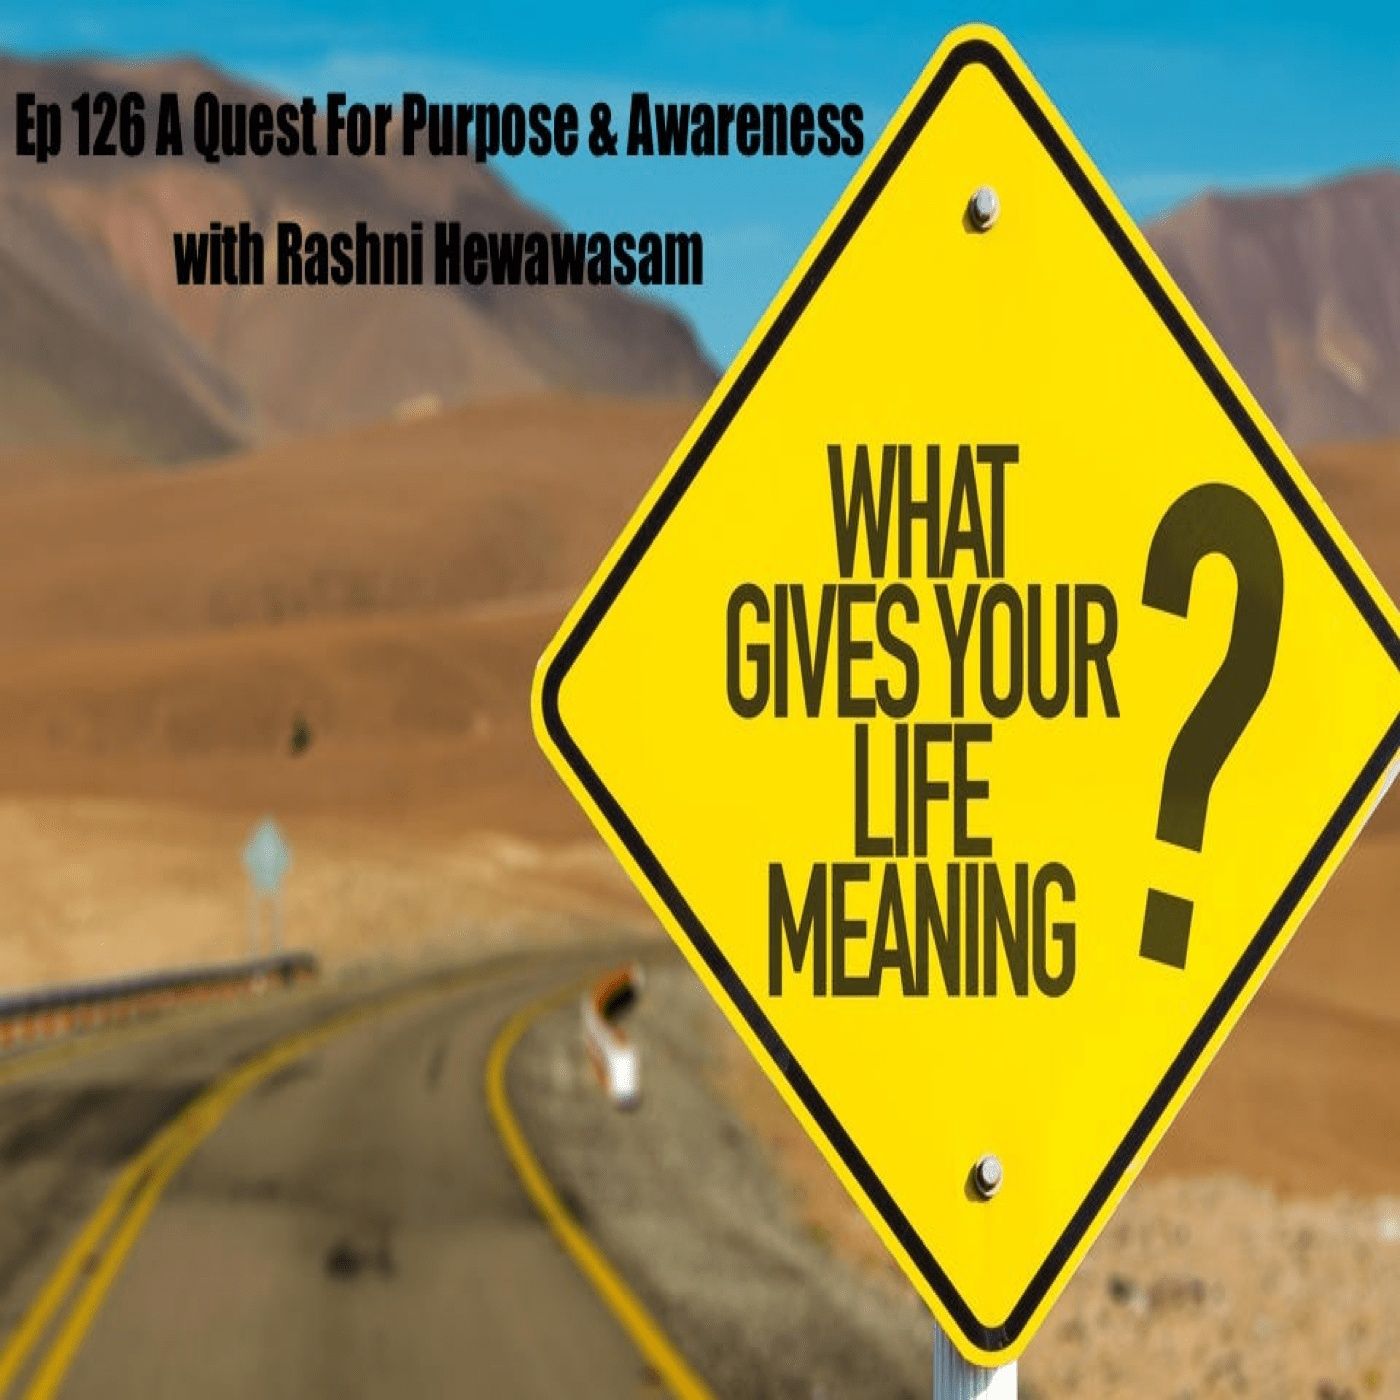 126. A Quest for Purpose & Awareness